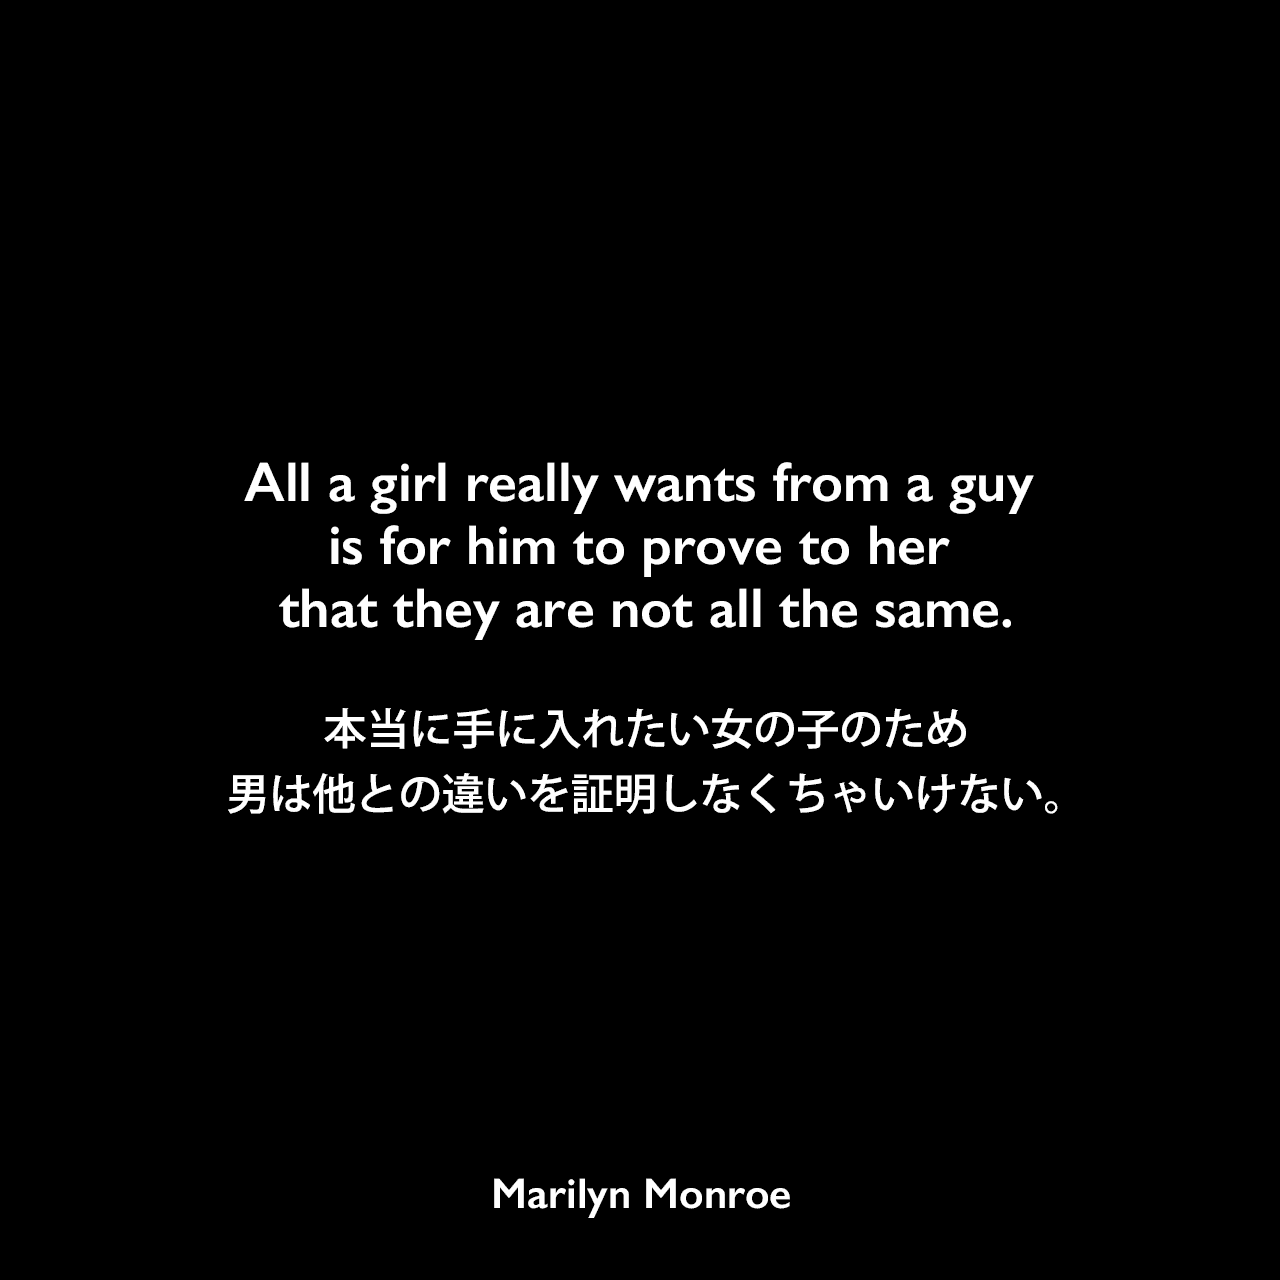 All a girl really wants from a guy is for him to prove to her that they are not all the same.本当に手に入れたい女の子のため、男は他との違いを証明しなくちゃいけない。Marilyn Monroe